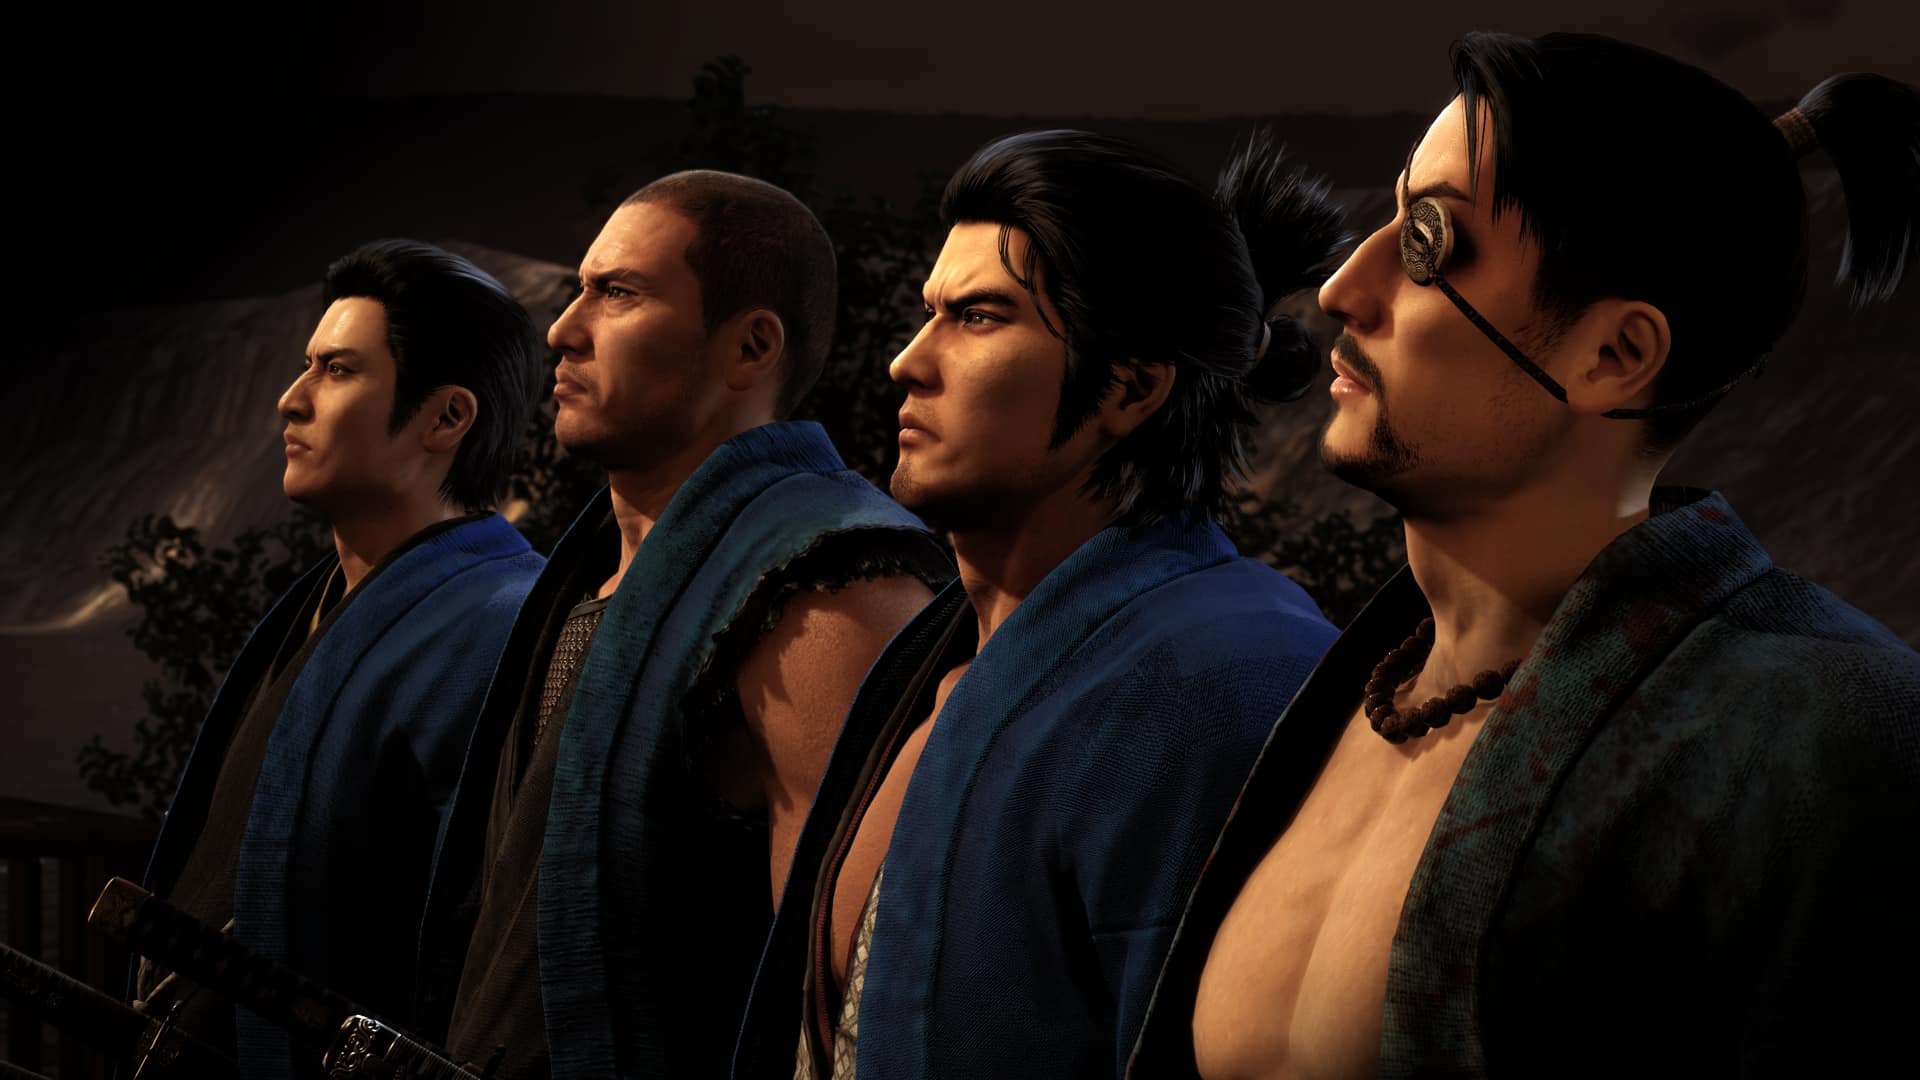 Like A Dragon: Ishin! review - Blast from the past